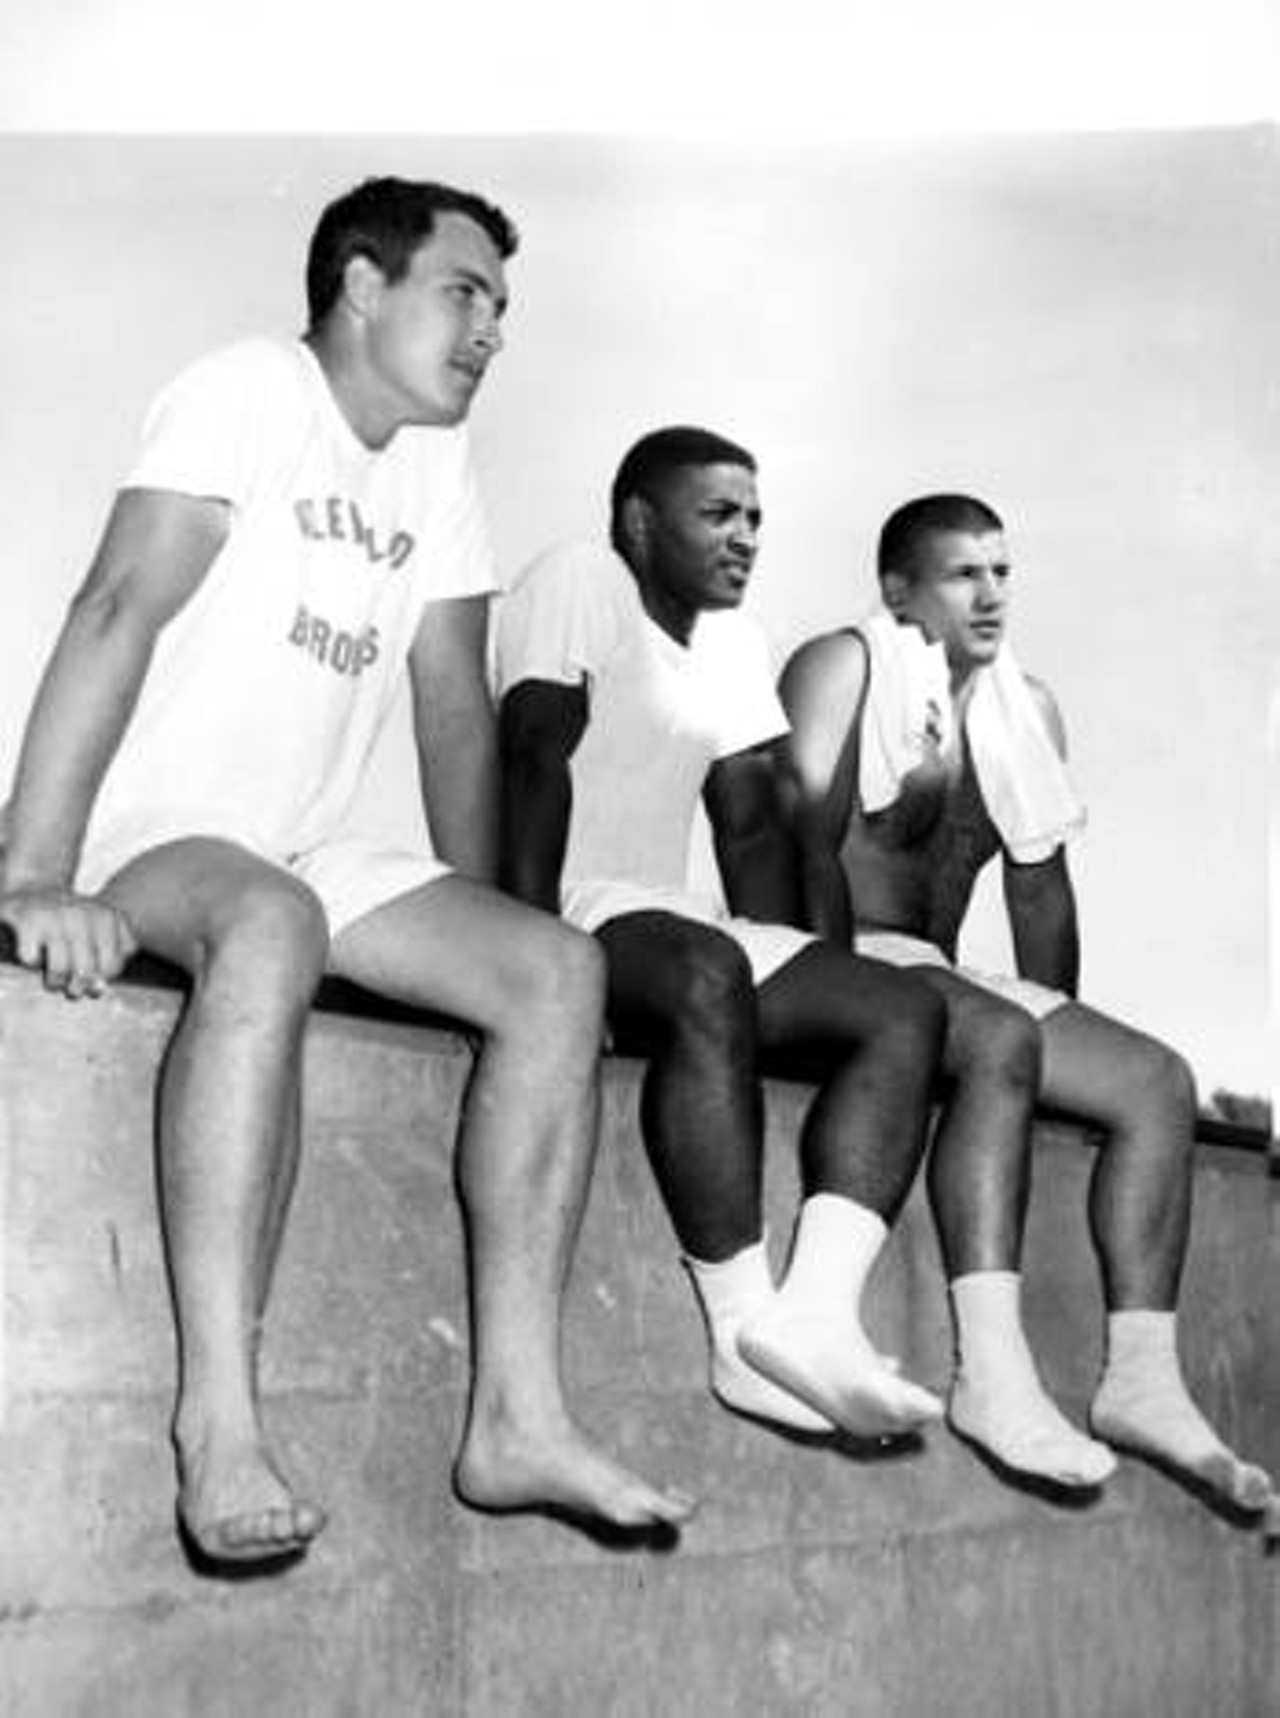 Relaxing at 1964 training camp (left to right) are quarterback Frank Ryan, running back Charlie Scales, and linebacker Vince Costello.